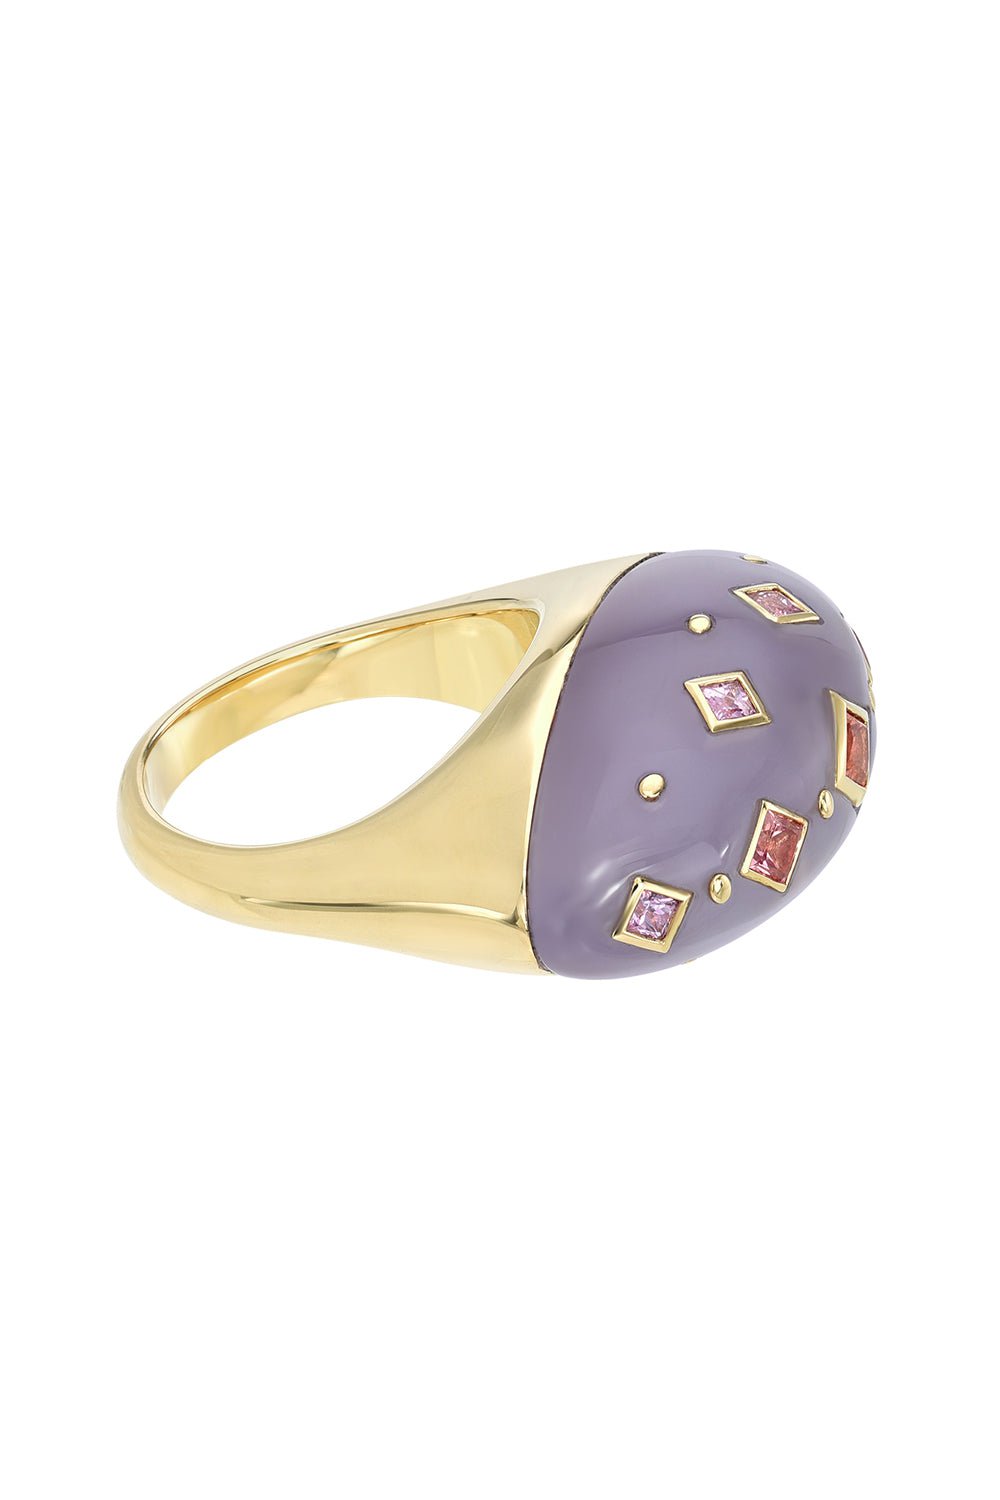 MEREDITH YOUNG-Cosmic Twillight Ring-YELLOW GOLD